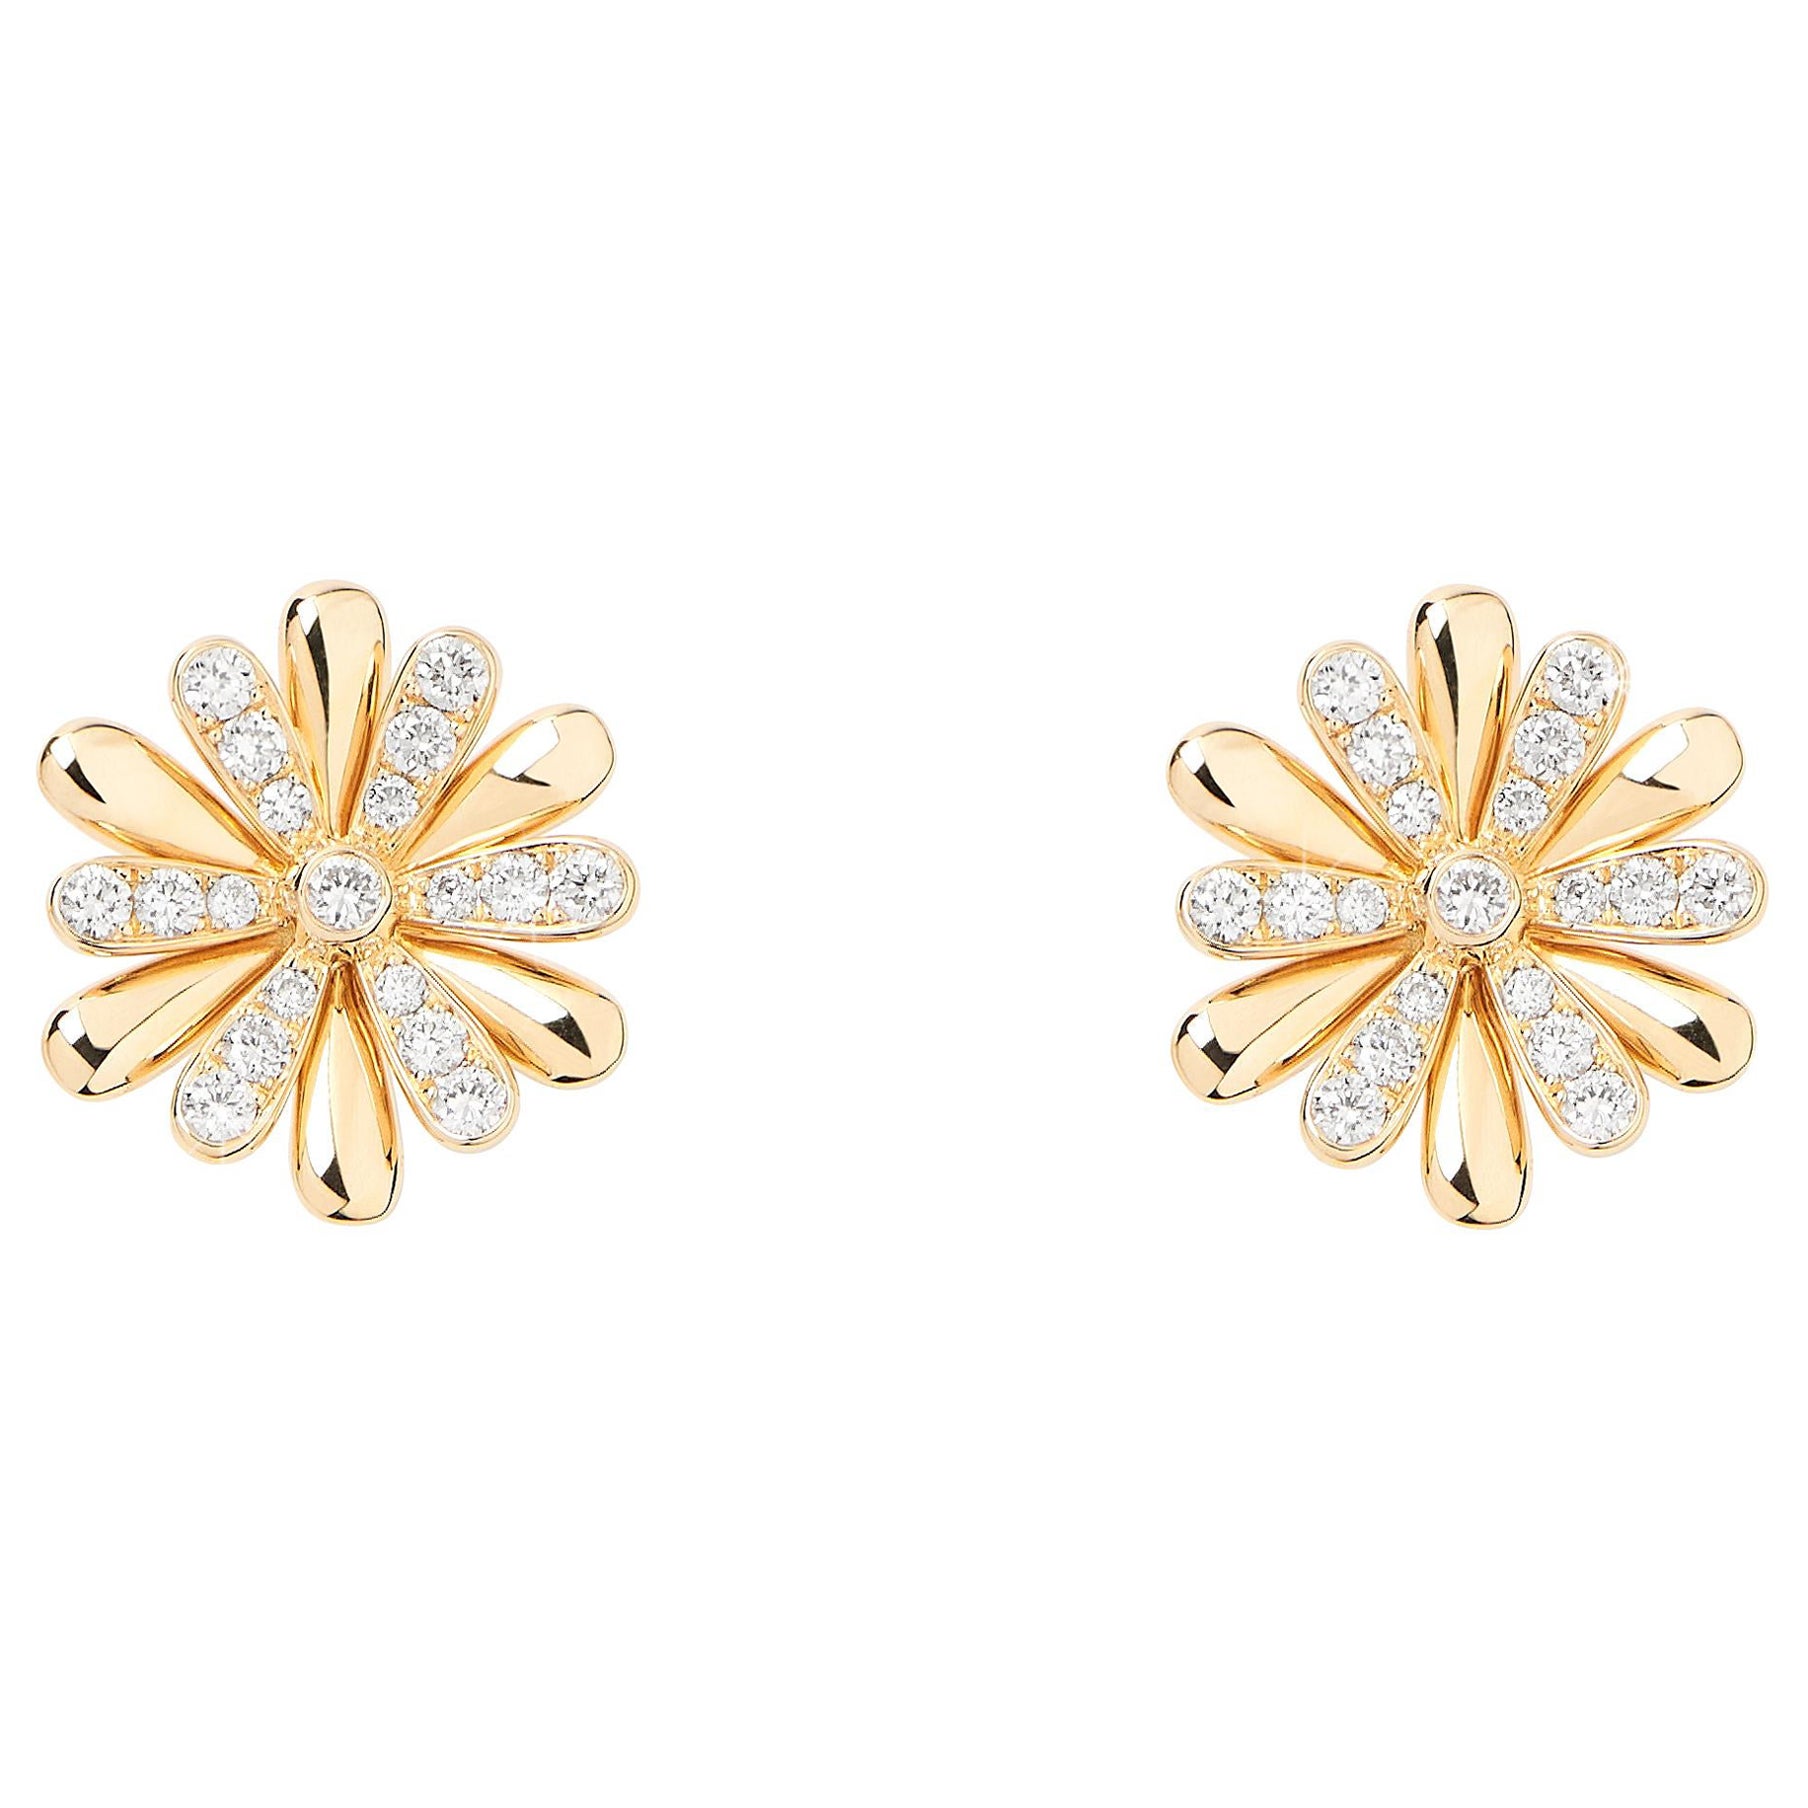 18 Carat Yellow and White Gold Earrings, Diamonds, Flower Collection